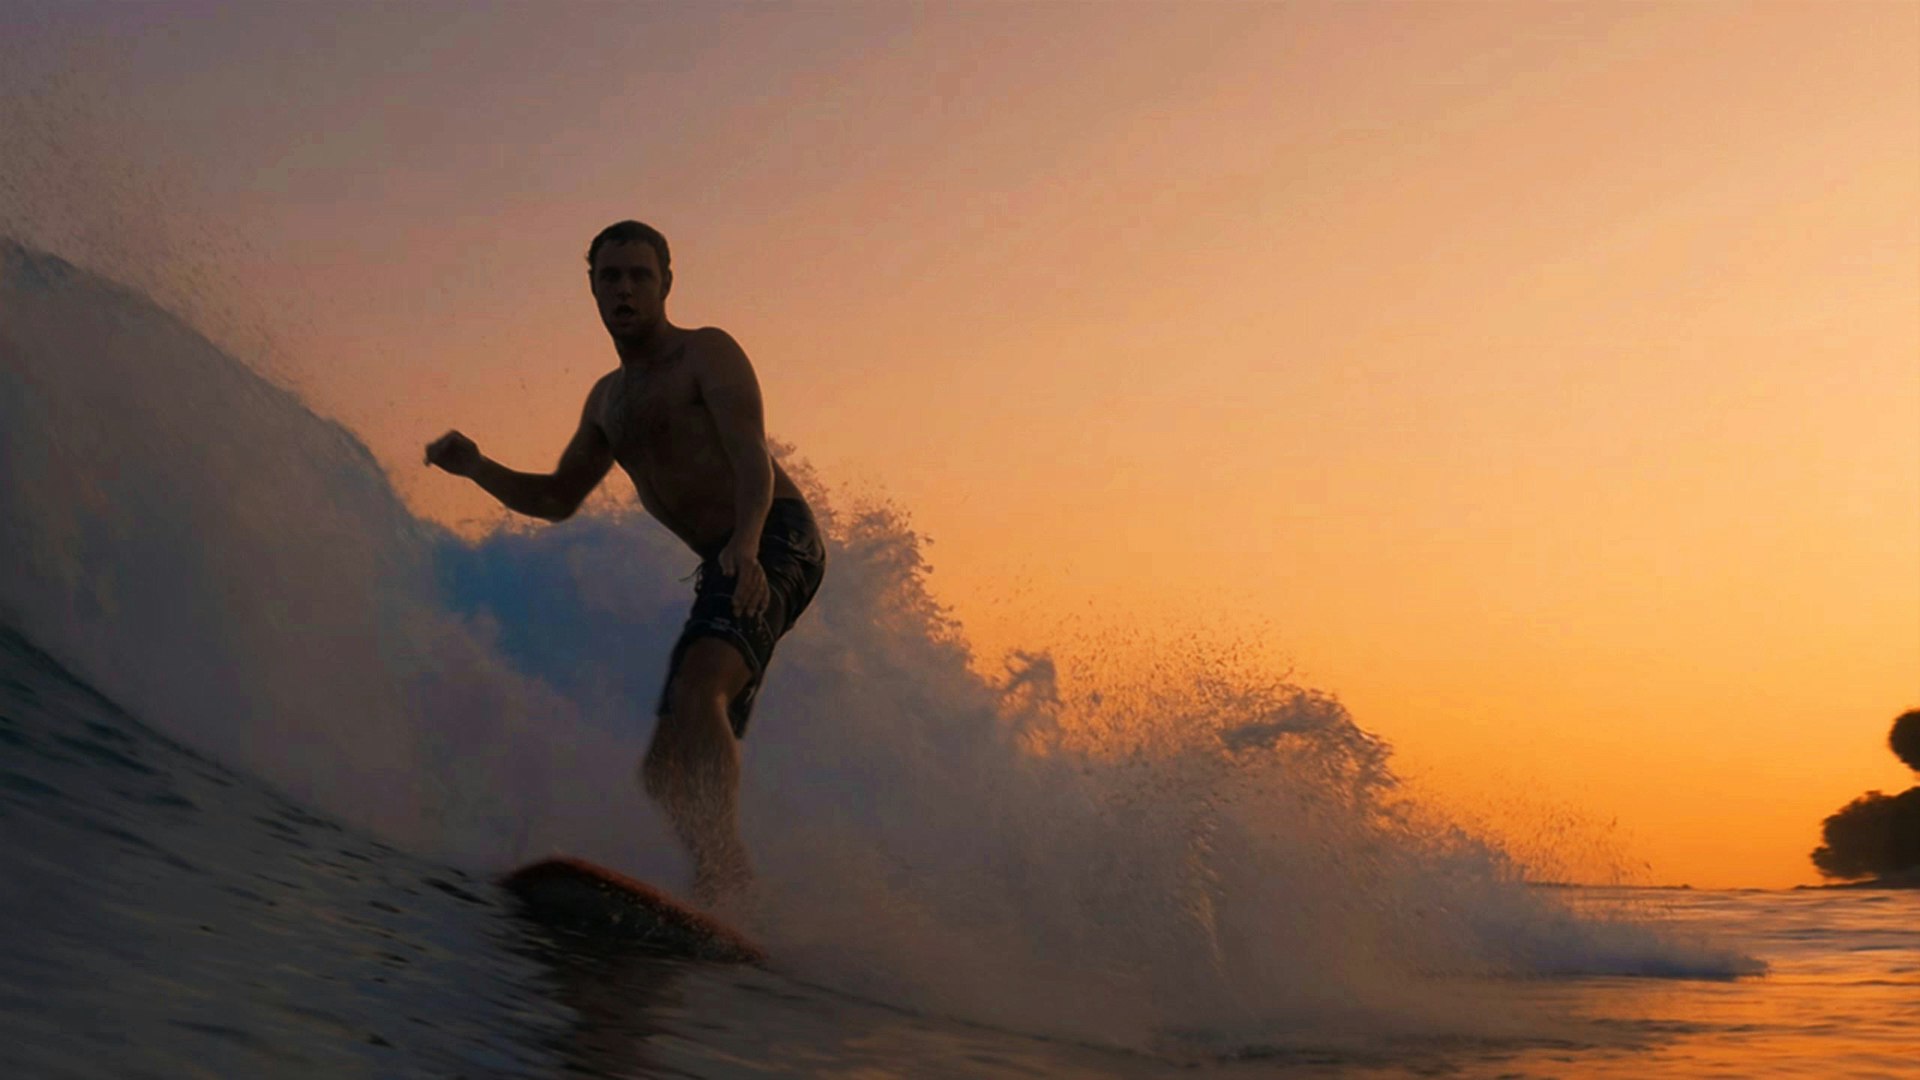 This experimental new film reframes the magic of surfing